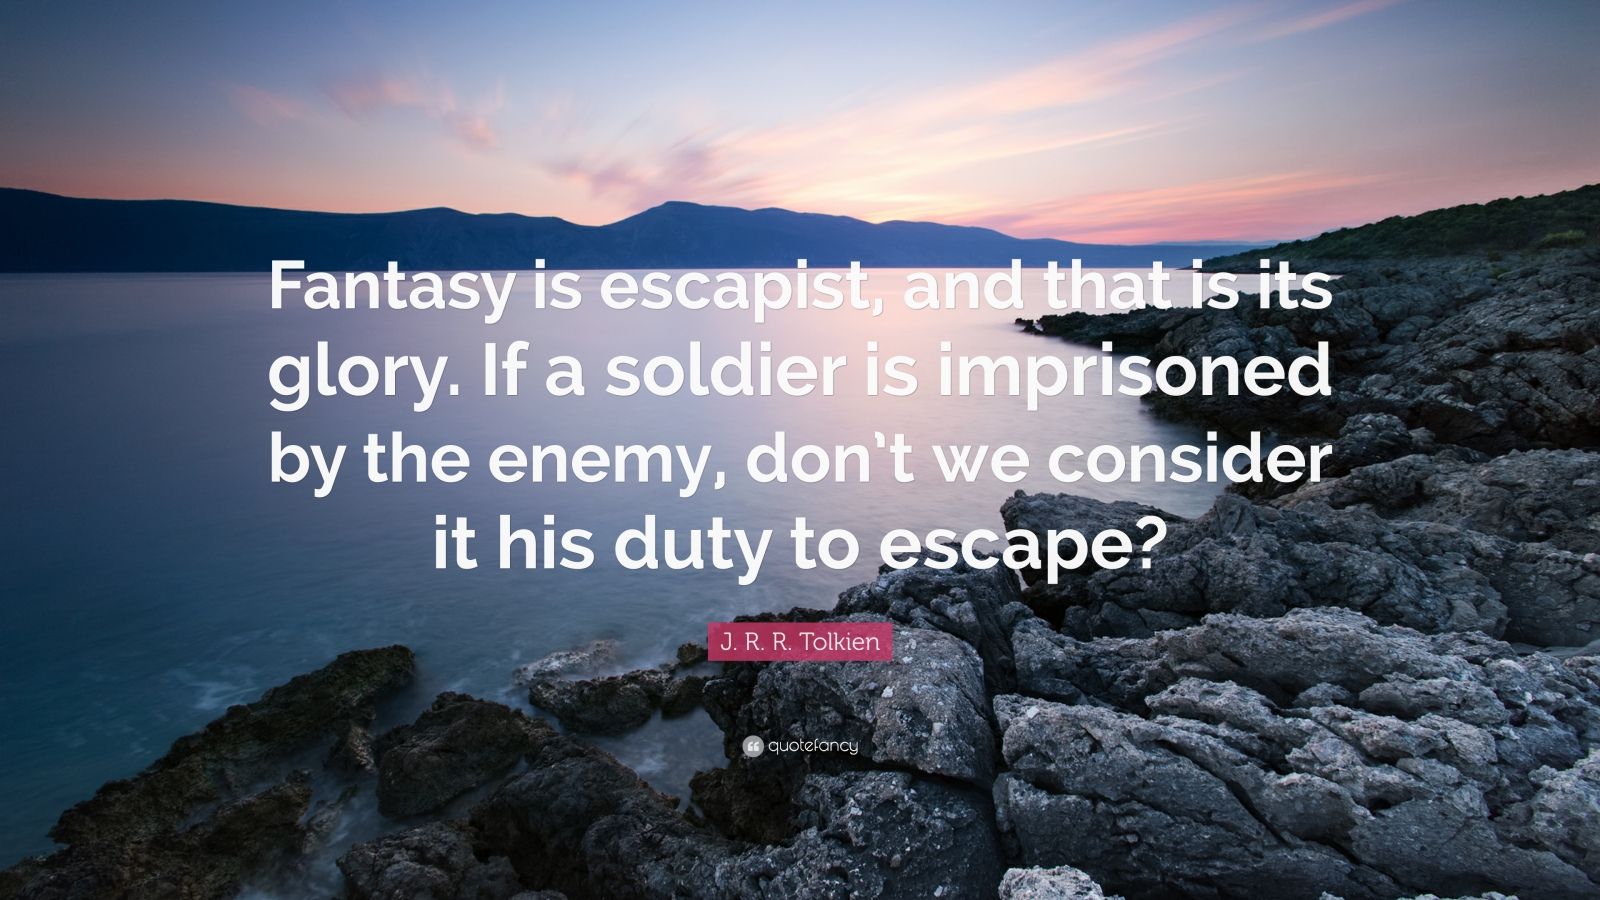 J. R. R. Tolkien Quote: “Fantasy is escapist, and that is its glory. If